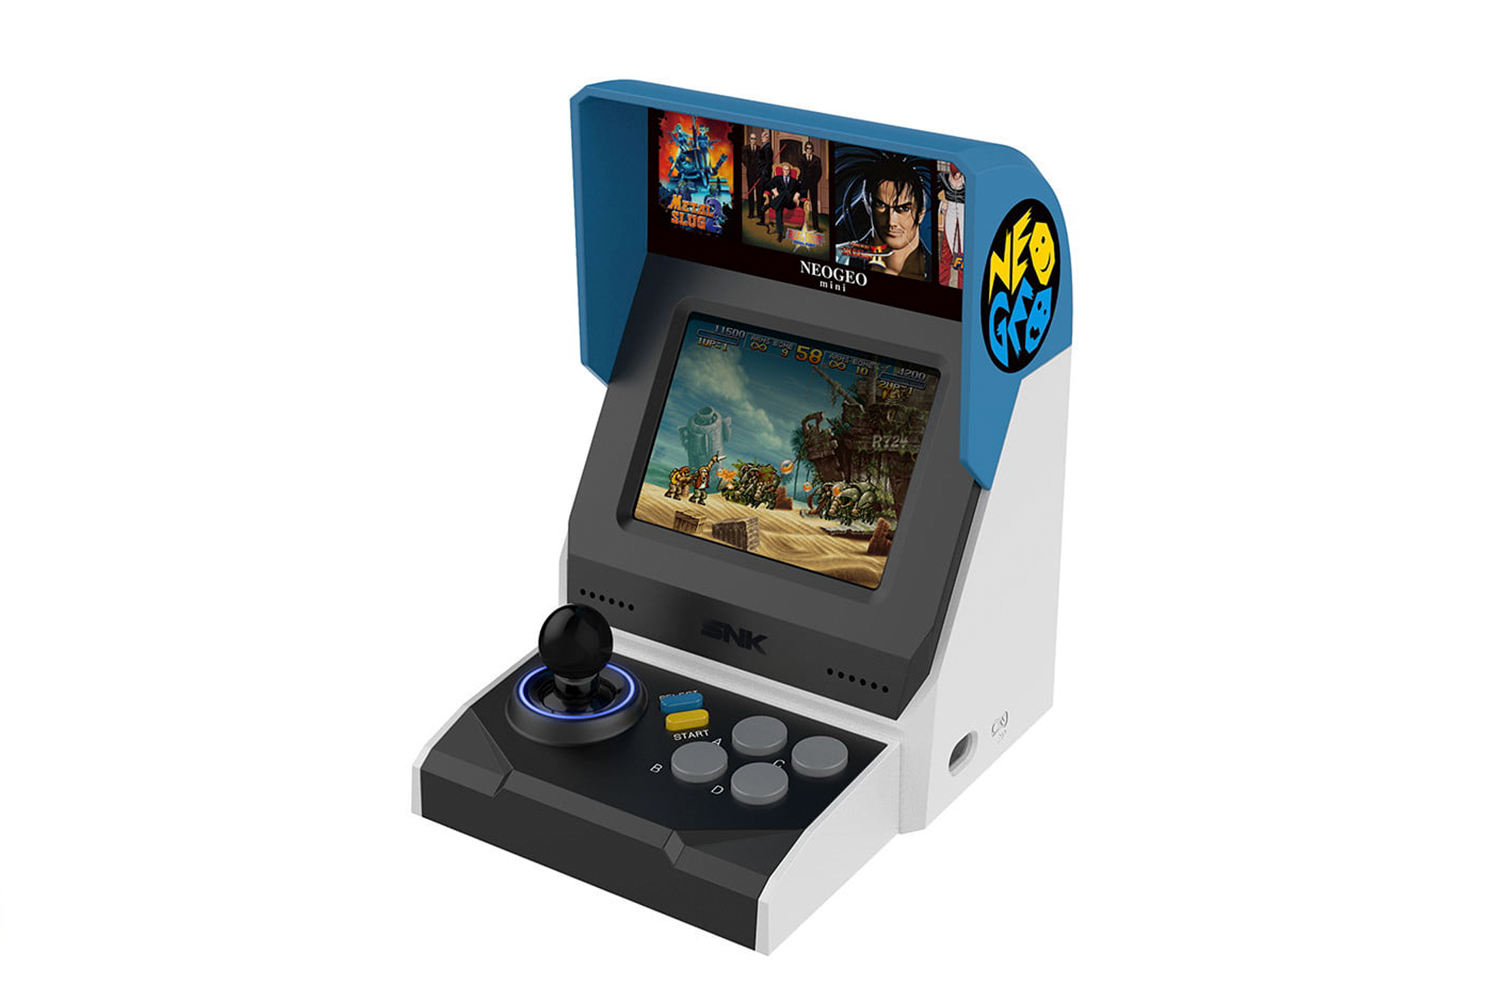 SNK Announces Neo Geo Mini With Built-In Screen | Digital Trends